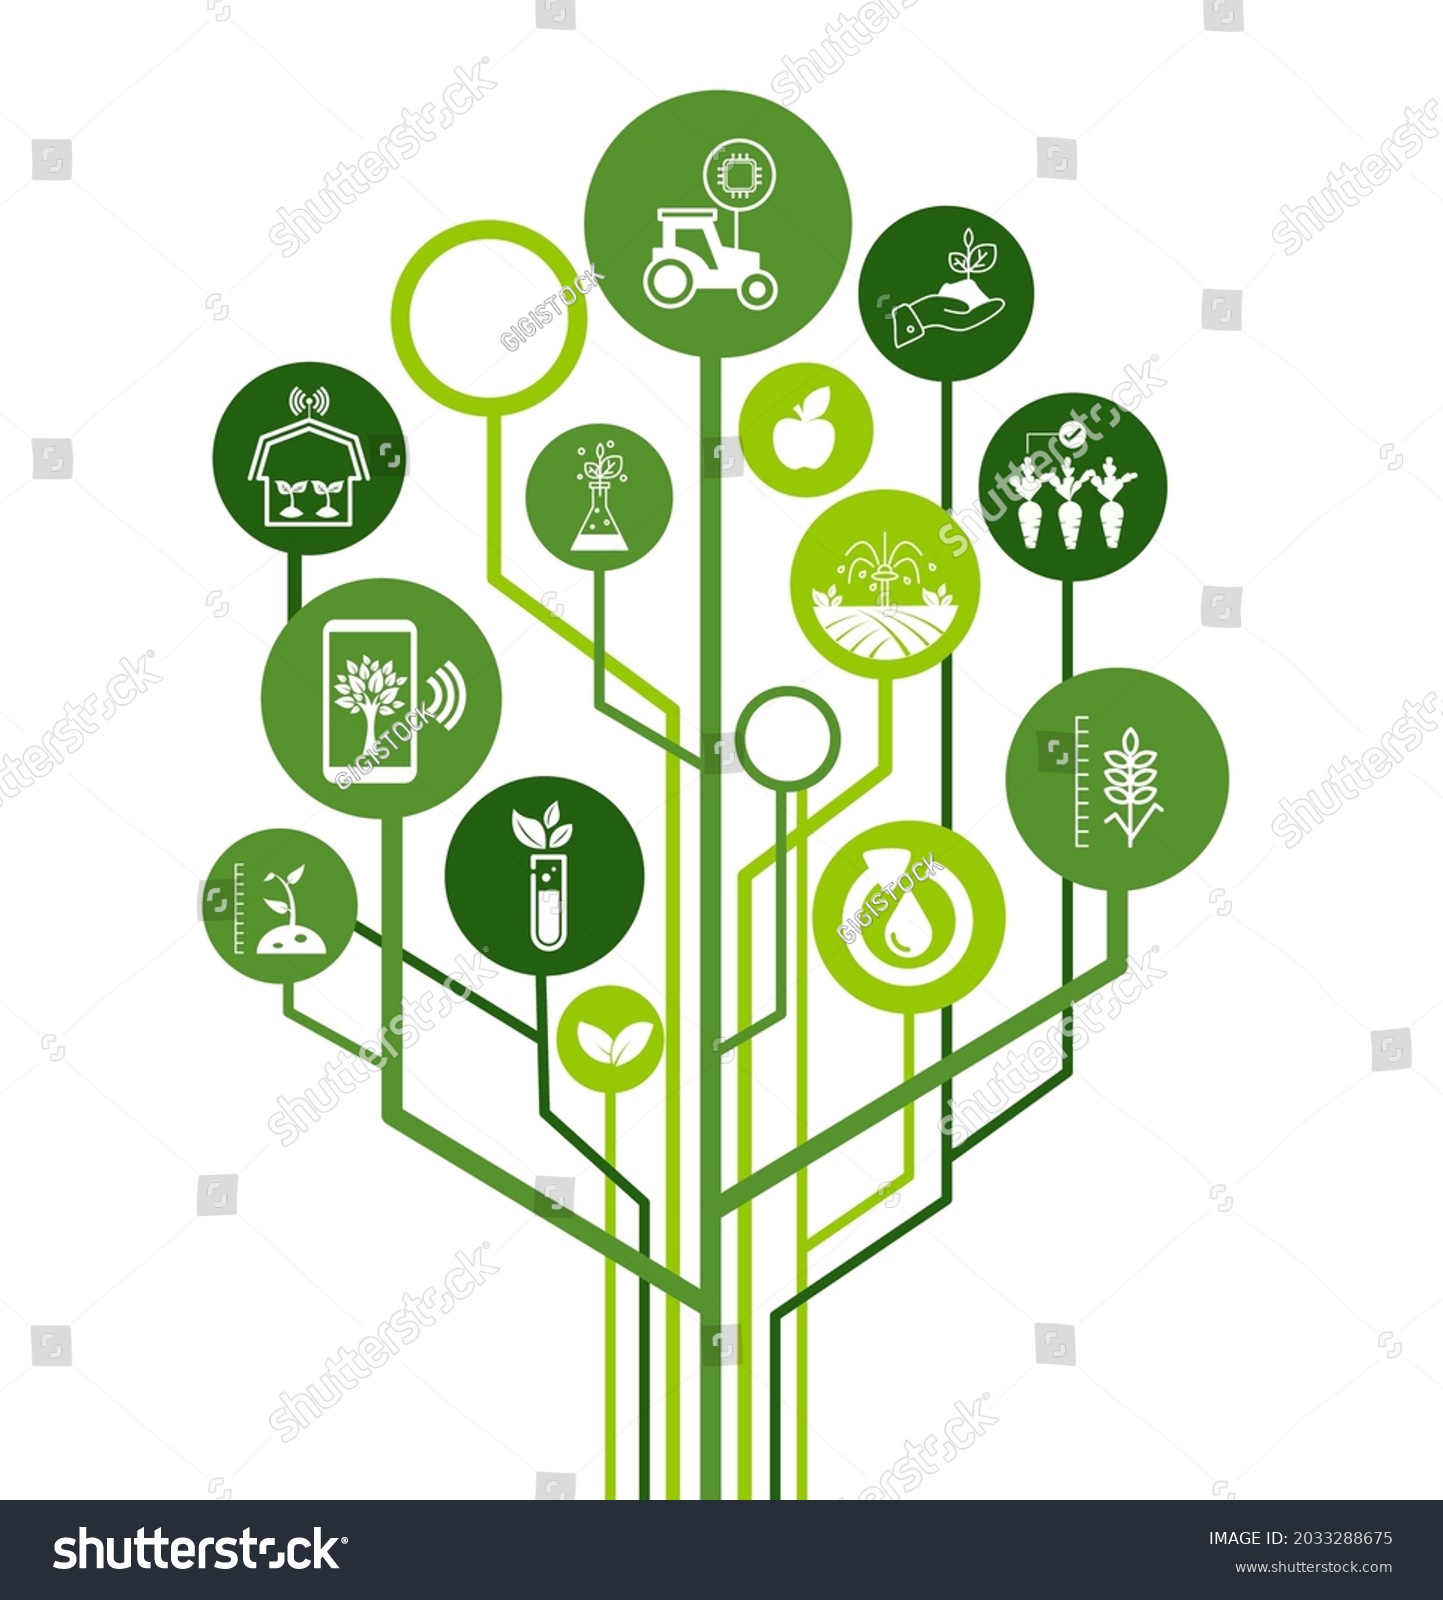 smart farm or agritech vector illustration. Banner with connected icons related to smart agriculture technology, digital iot farming methods and farm automation.  #2033288675